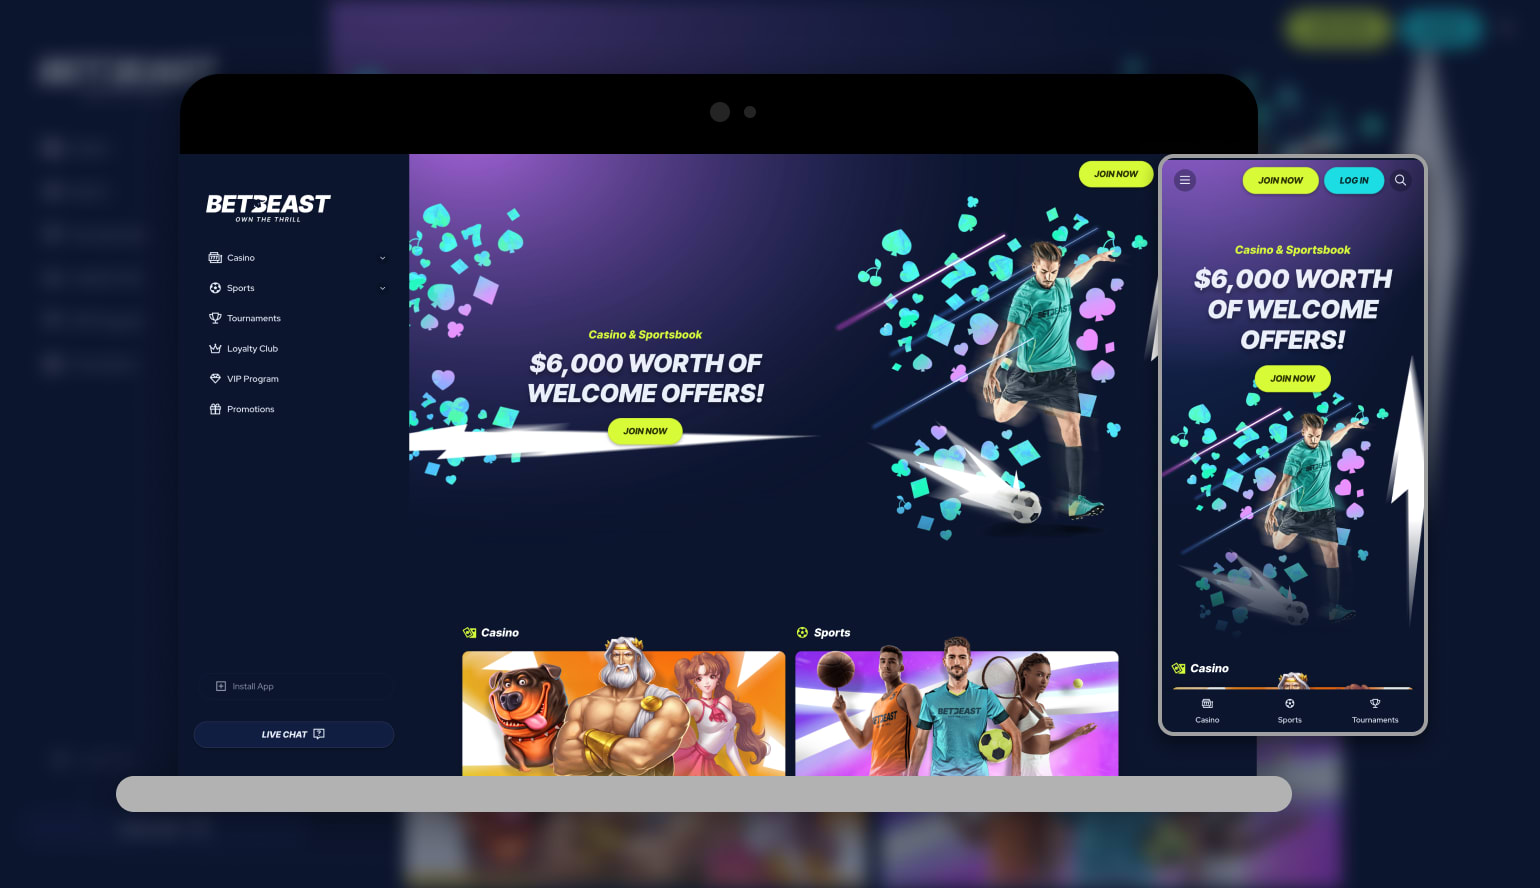 a screenshot showing what BetBeast Casino looks like on mobile and desktop devices